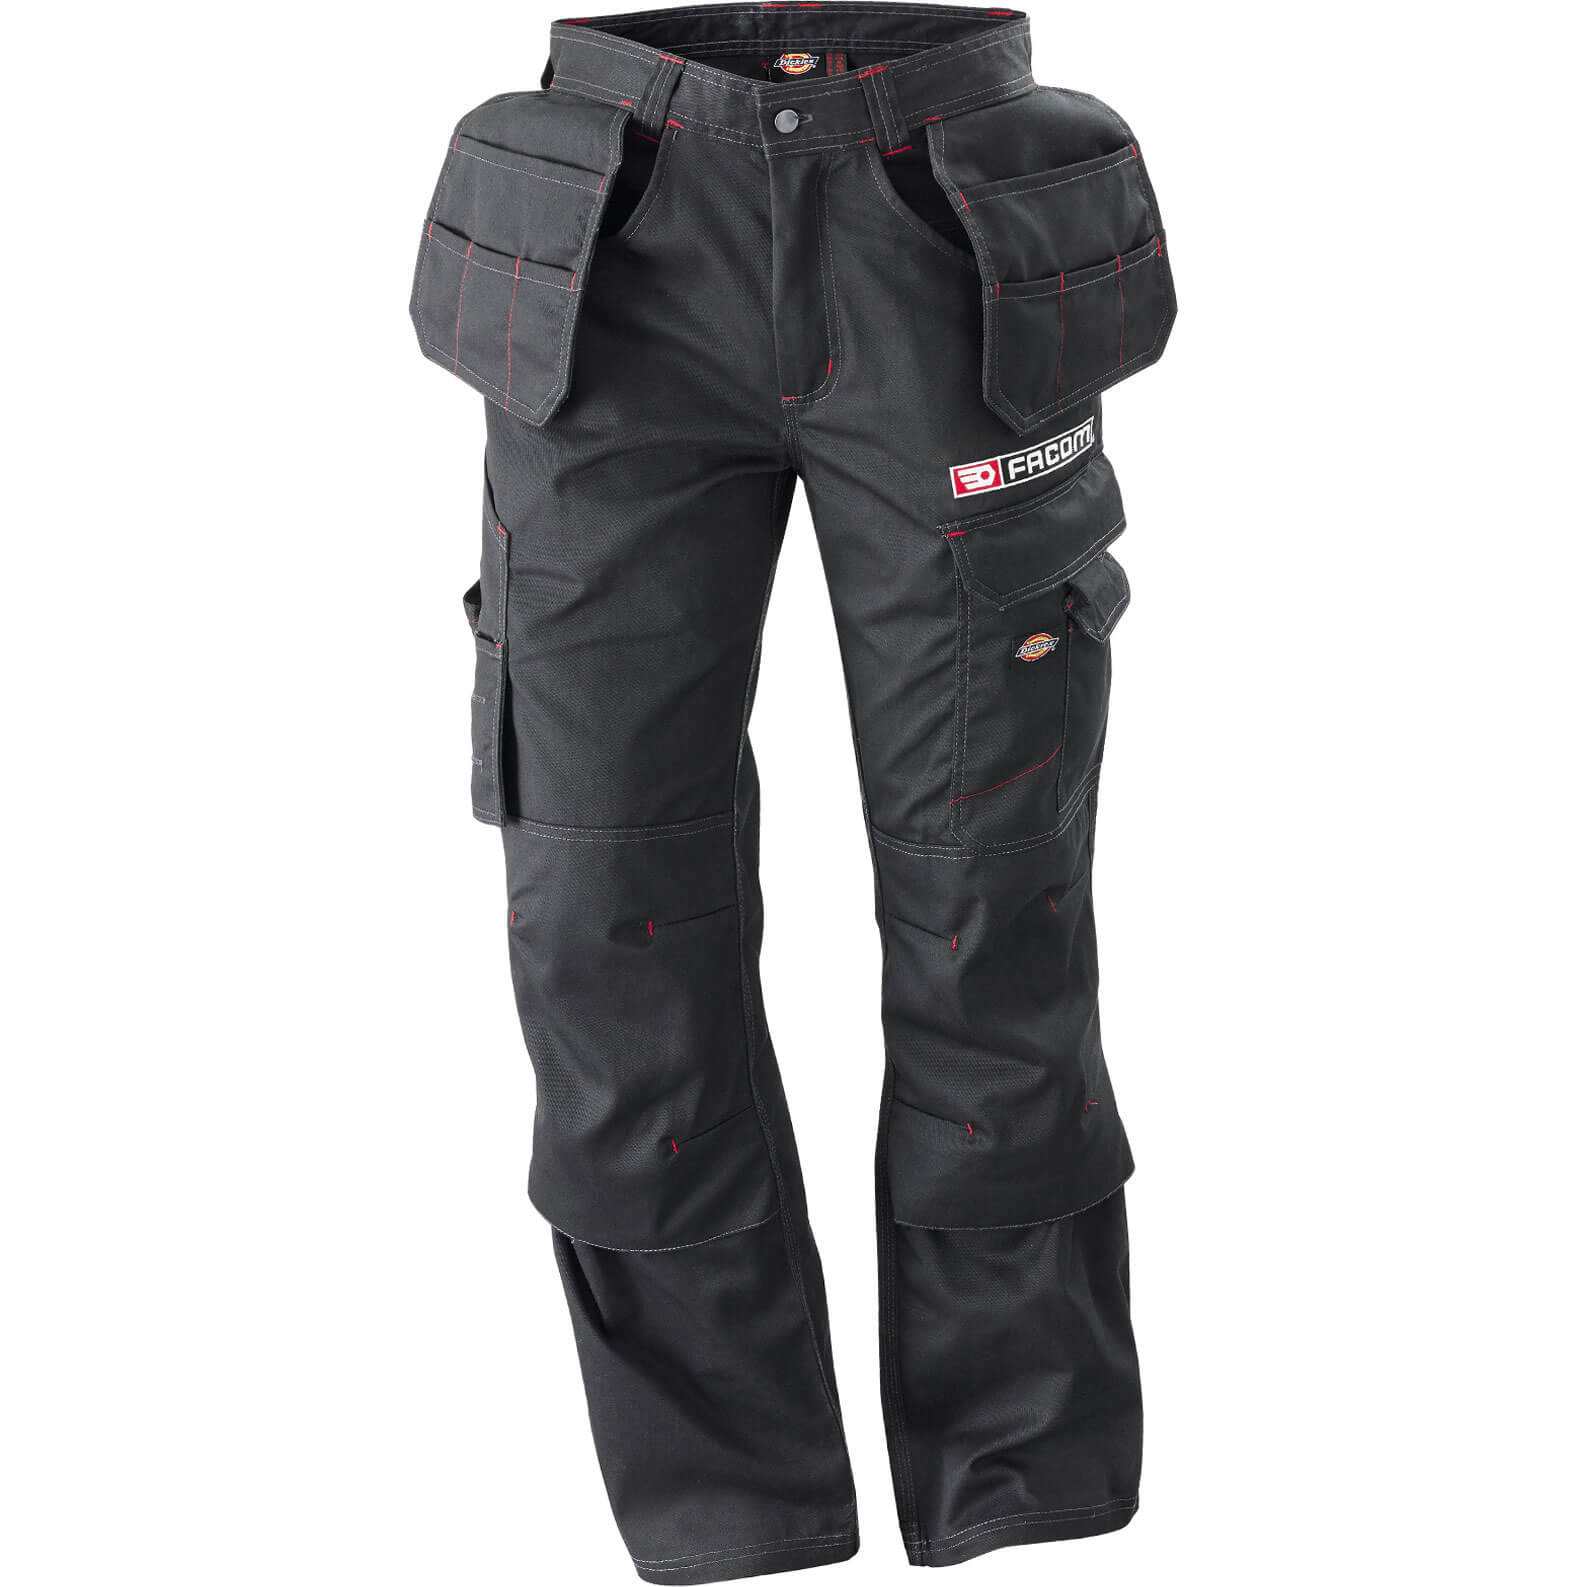 FACOM TOOLS BLACK Multi Pocket WORK TROUSERS 40" Size: XXXL Made by Dickies 